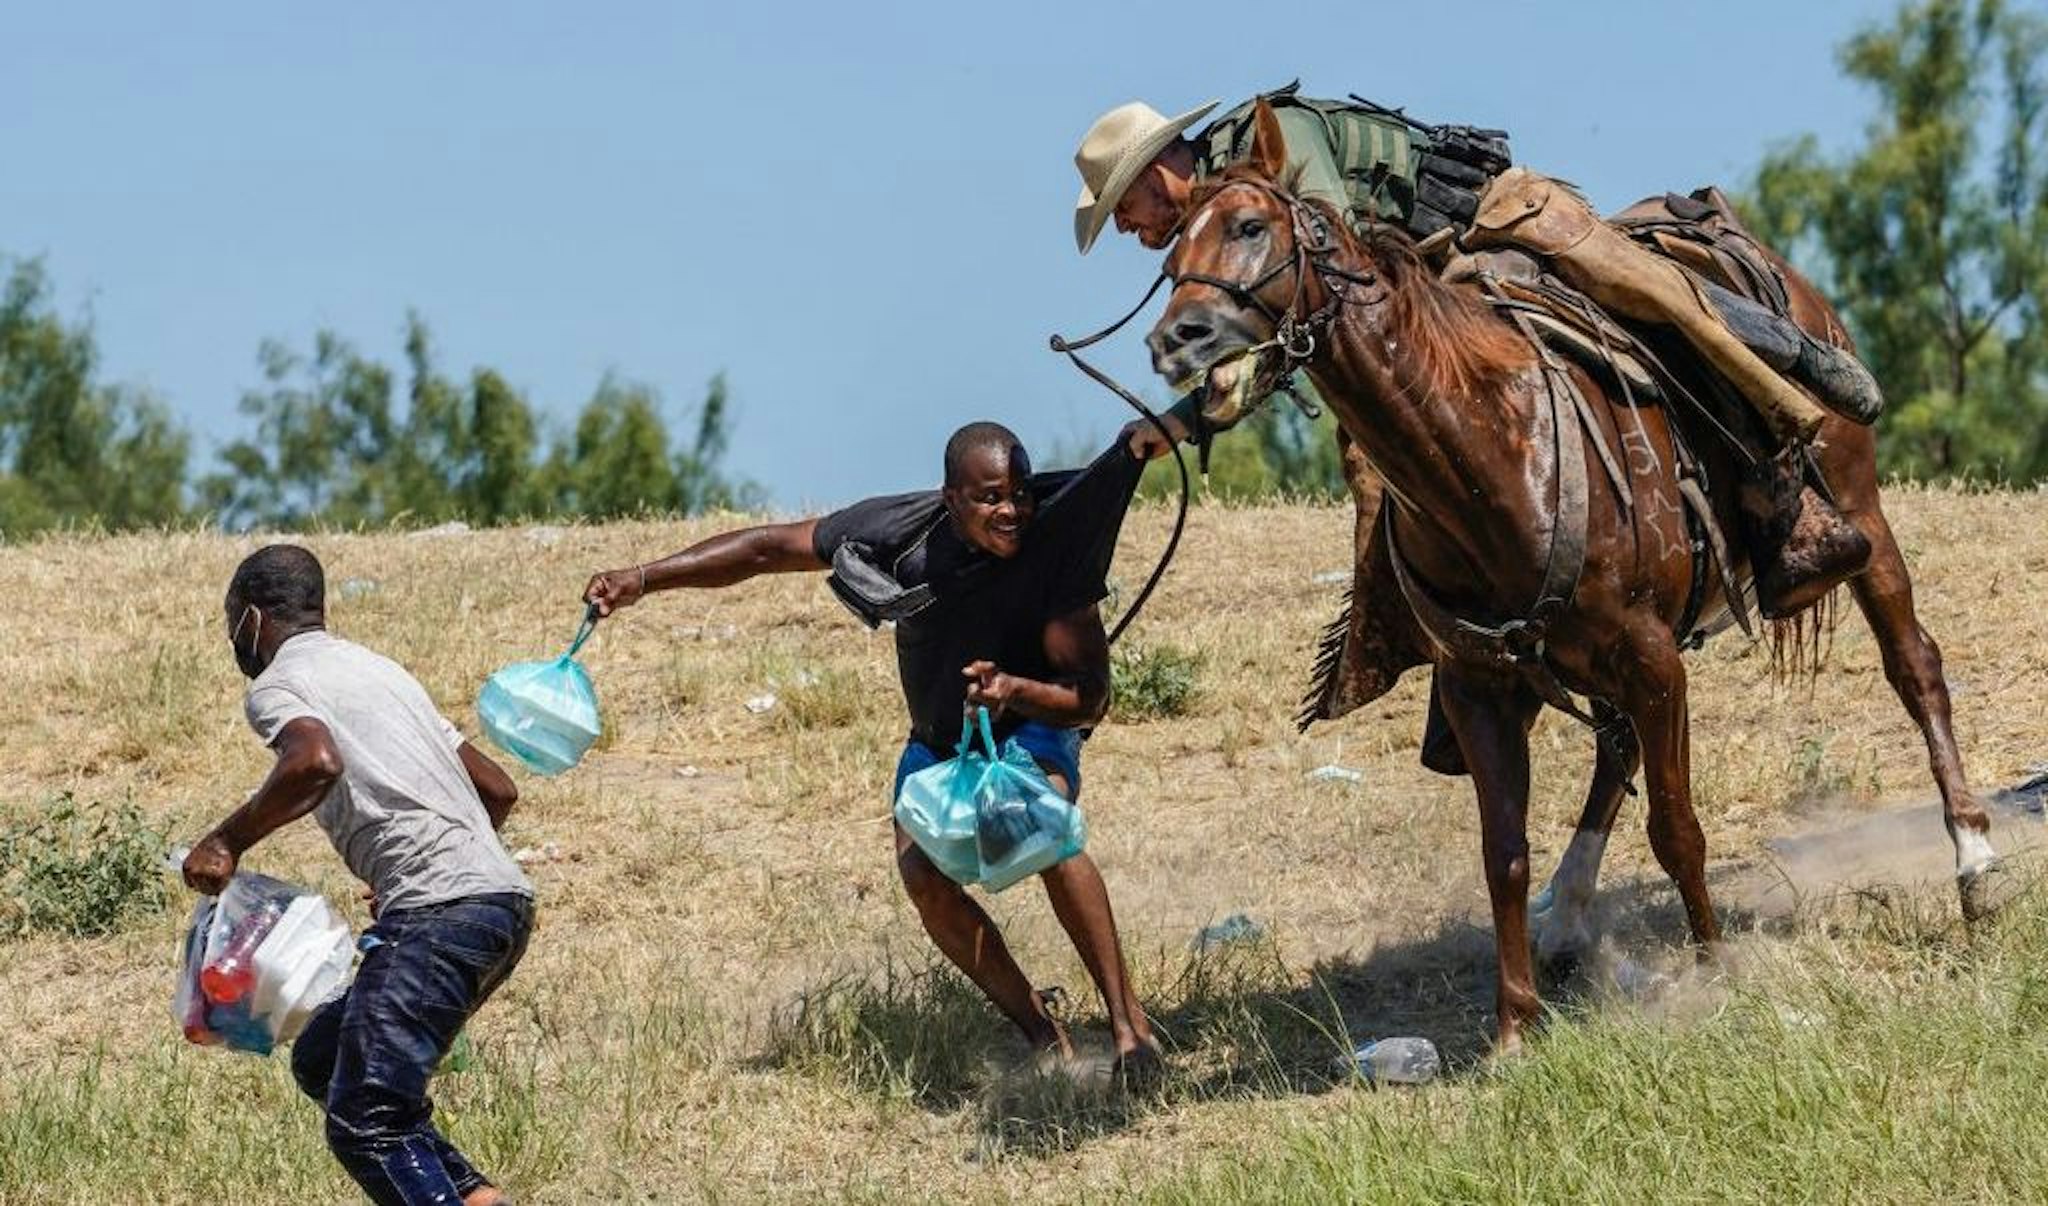 TOPSHOT - A United States Border Patrol agent on horseback tries to stop a Haitian migrant from entering an encampment on the banks of the Rio Grande near the Acuna Del Rio International Bridge in Del Rio, Texas on September 19, 2021. - The United States said Saturday it would ramp up deportation flights for thousands of migrants who flooded into the Texas border city of Del Rio, as authorities scramble to alleviate a burgeoning crisis for President Joe Biden's administration. (Photo by PAUL RATJE / AFP) (Photo by PAUL RATJE/AFP via Getty Images)